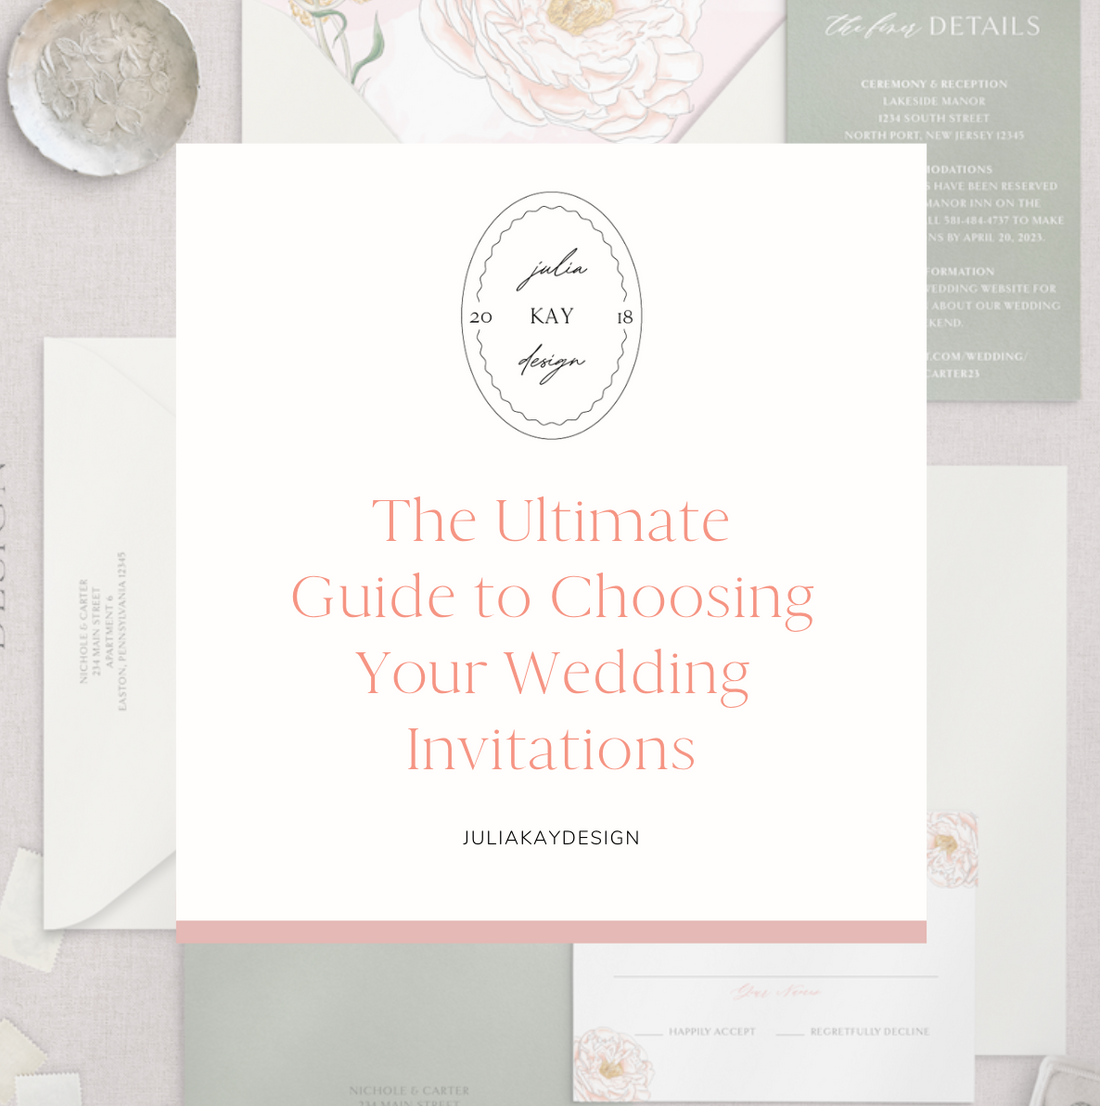 The Ultimate Guide to Choosing Your Wedding Invitations – Julia Kay Design